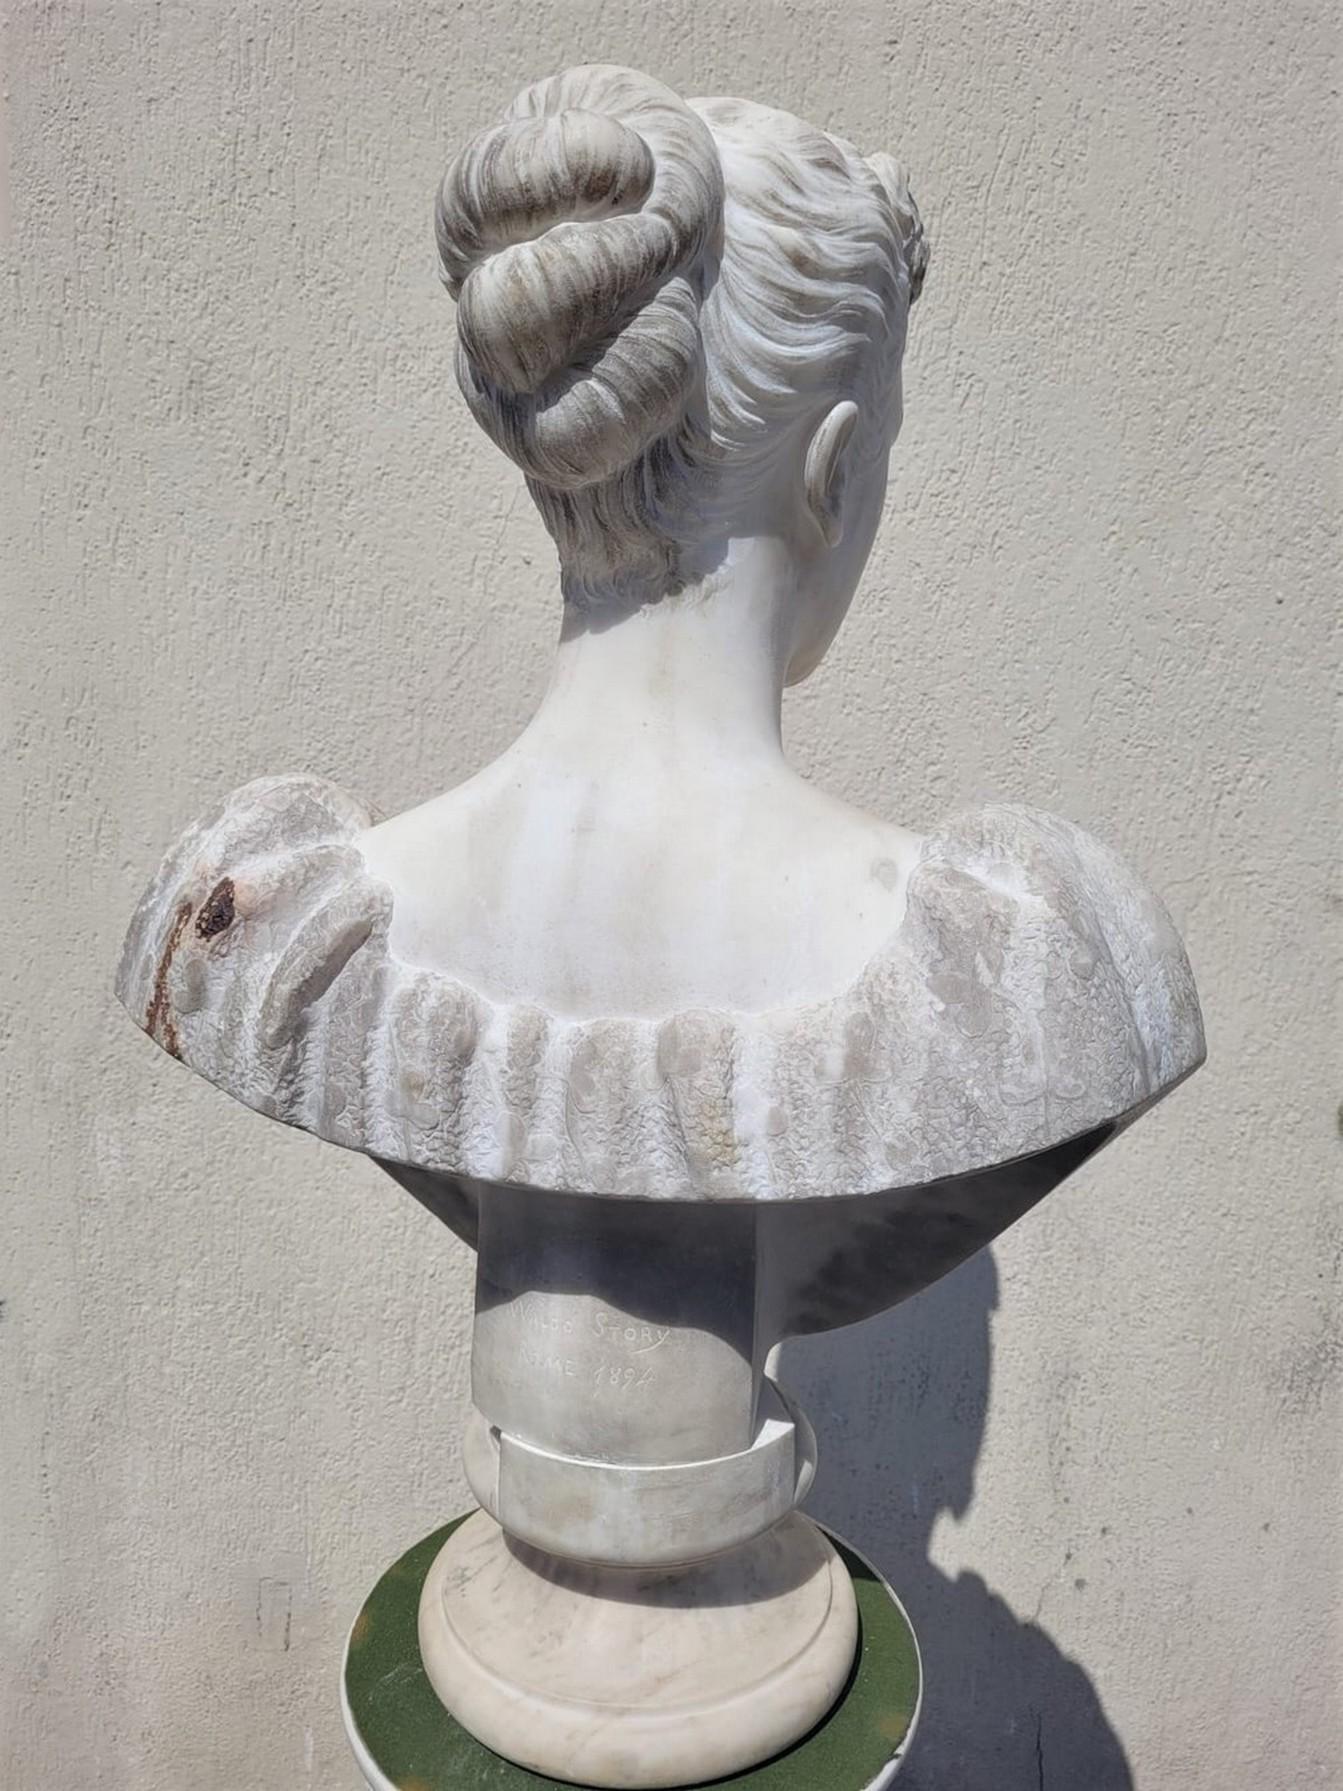 Large white marble bust of a noble lady: the facial features are fine, the hair up in a bun, the low-cut dress

Bust on a pedestal base

Signature on the back: Waldo Story, Rome 1894

Thomas Waldo Story is an American artist 1854-1915 , sculptor,